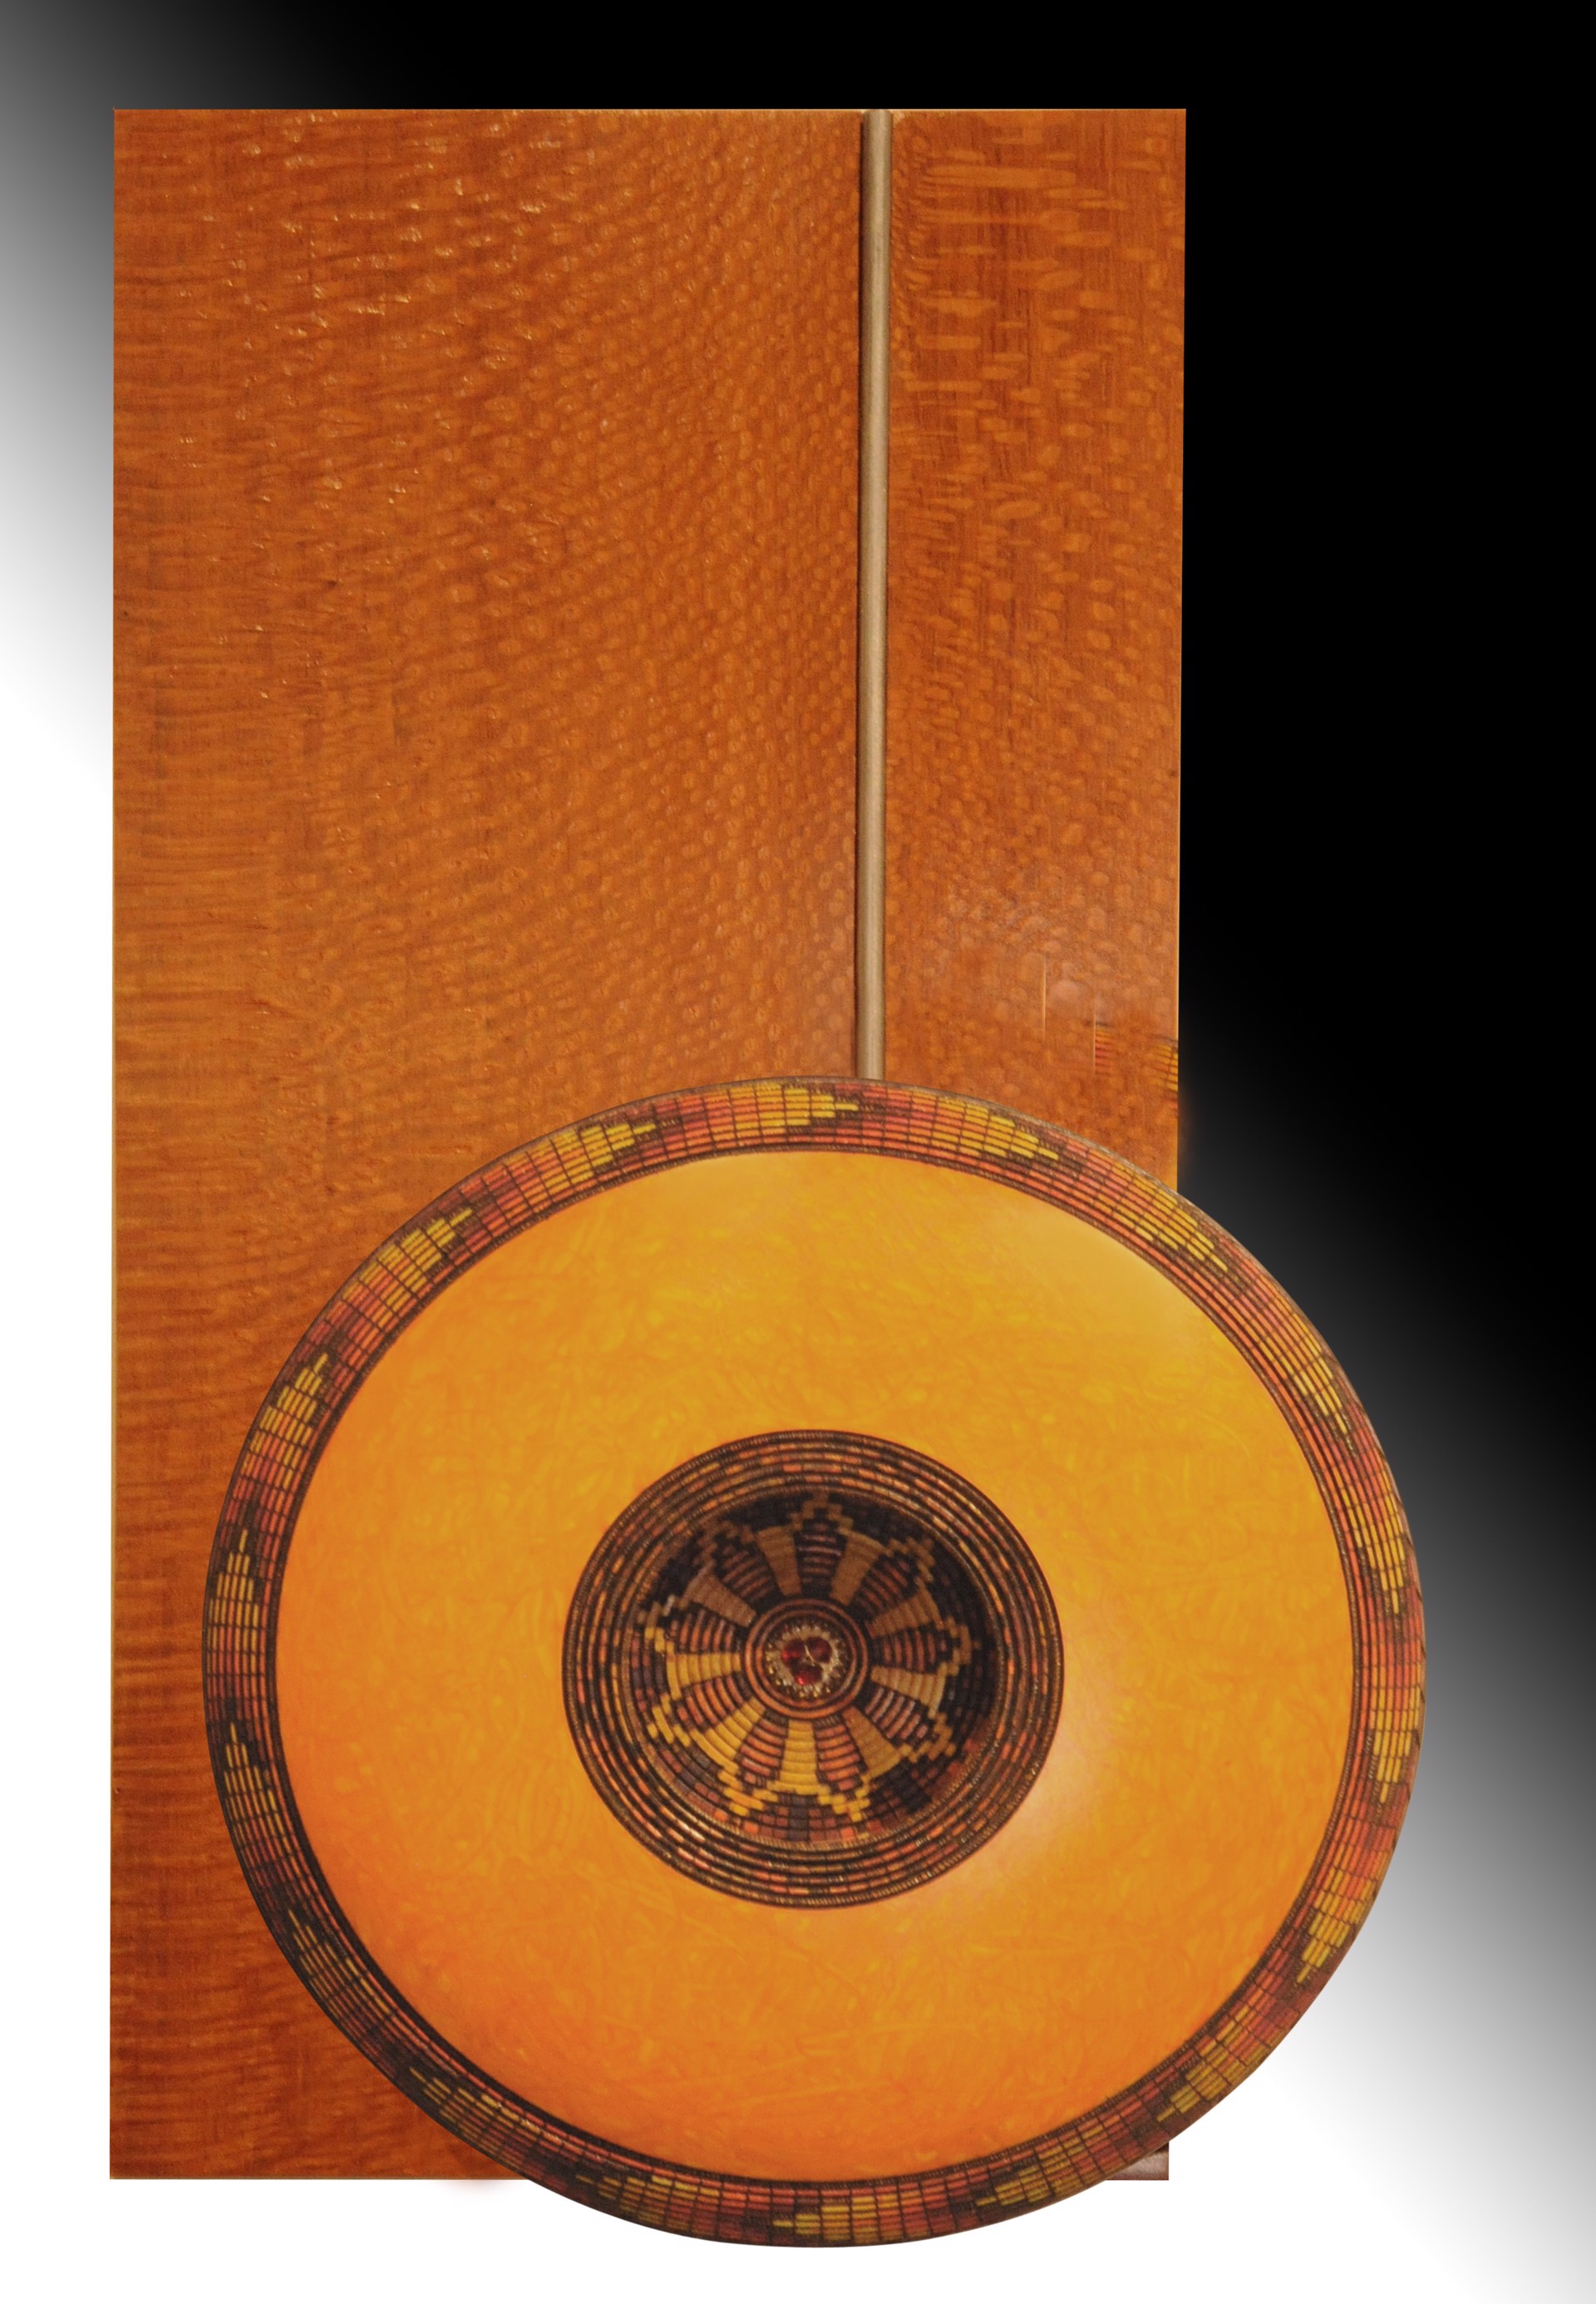 Sonoran Desert Medallion with Leopardwood by Keoni